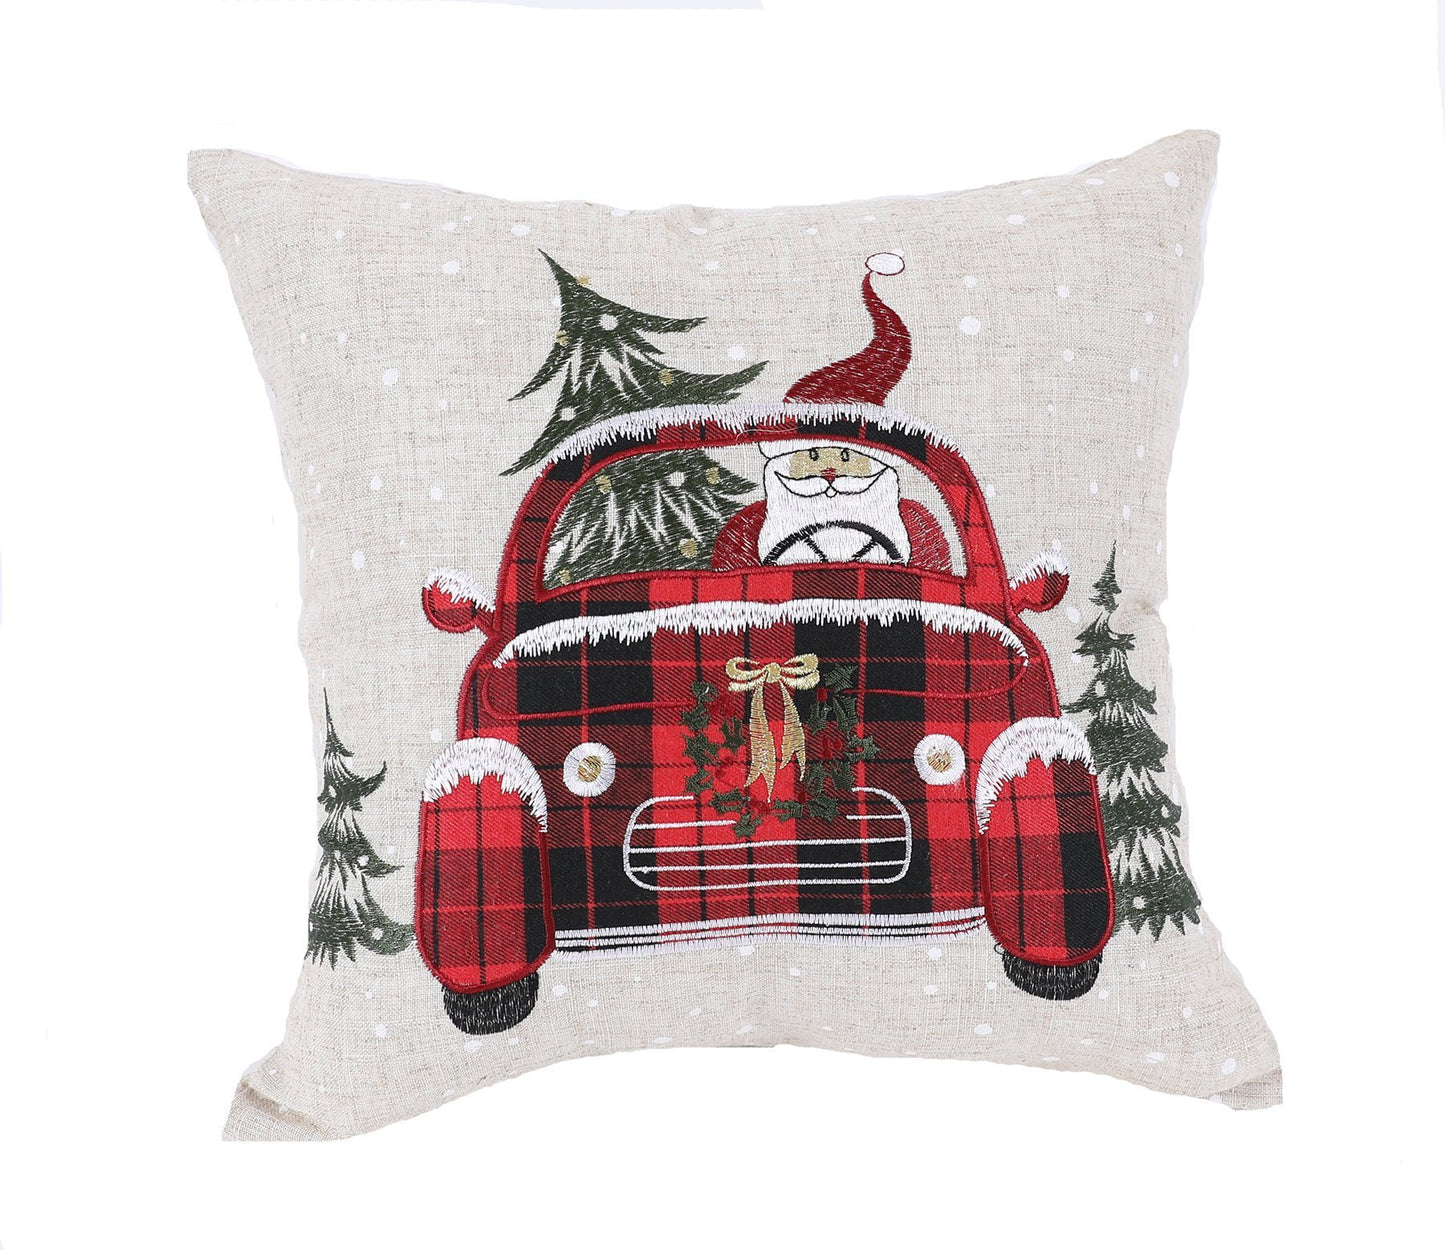 XD19884-Santa Claus Riding On Car Christmas Pillow 14 by 14-Inch